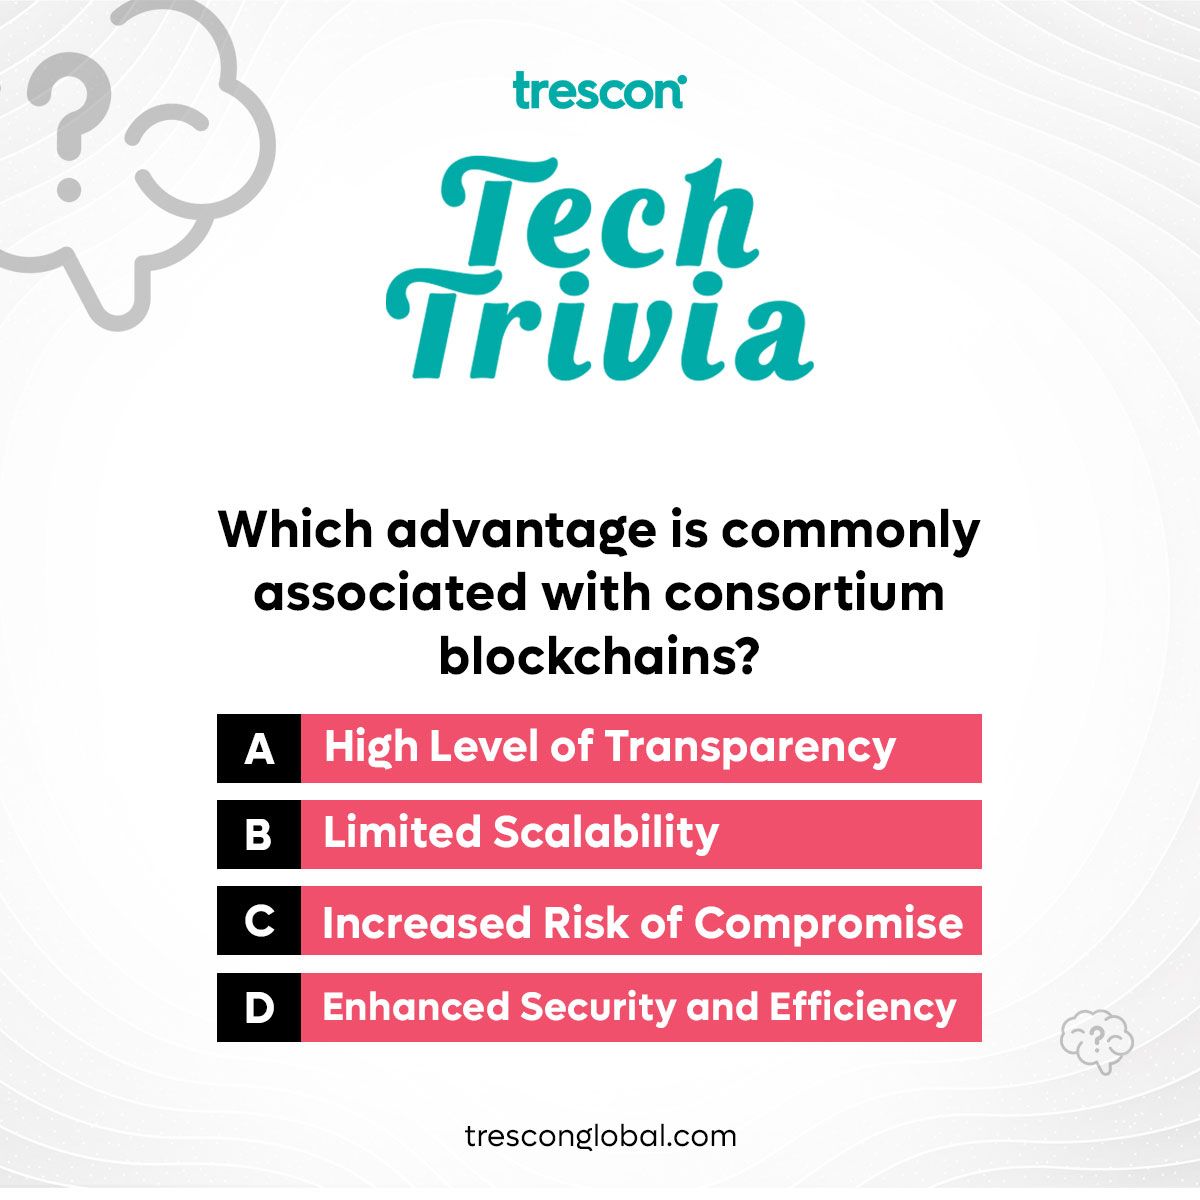 Dive into the world of consortium blockchains with our Tech Trivia live on LinkedIn! 

Don't miss out – join us now to win the Tech Virtuoso Badge! 

Link: hubs.li/Q02pWlfZ0

#TresconTechTrivia #Trescon #TechTrivia #BlockchainTechnology